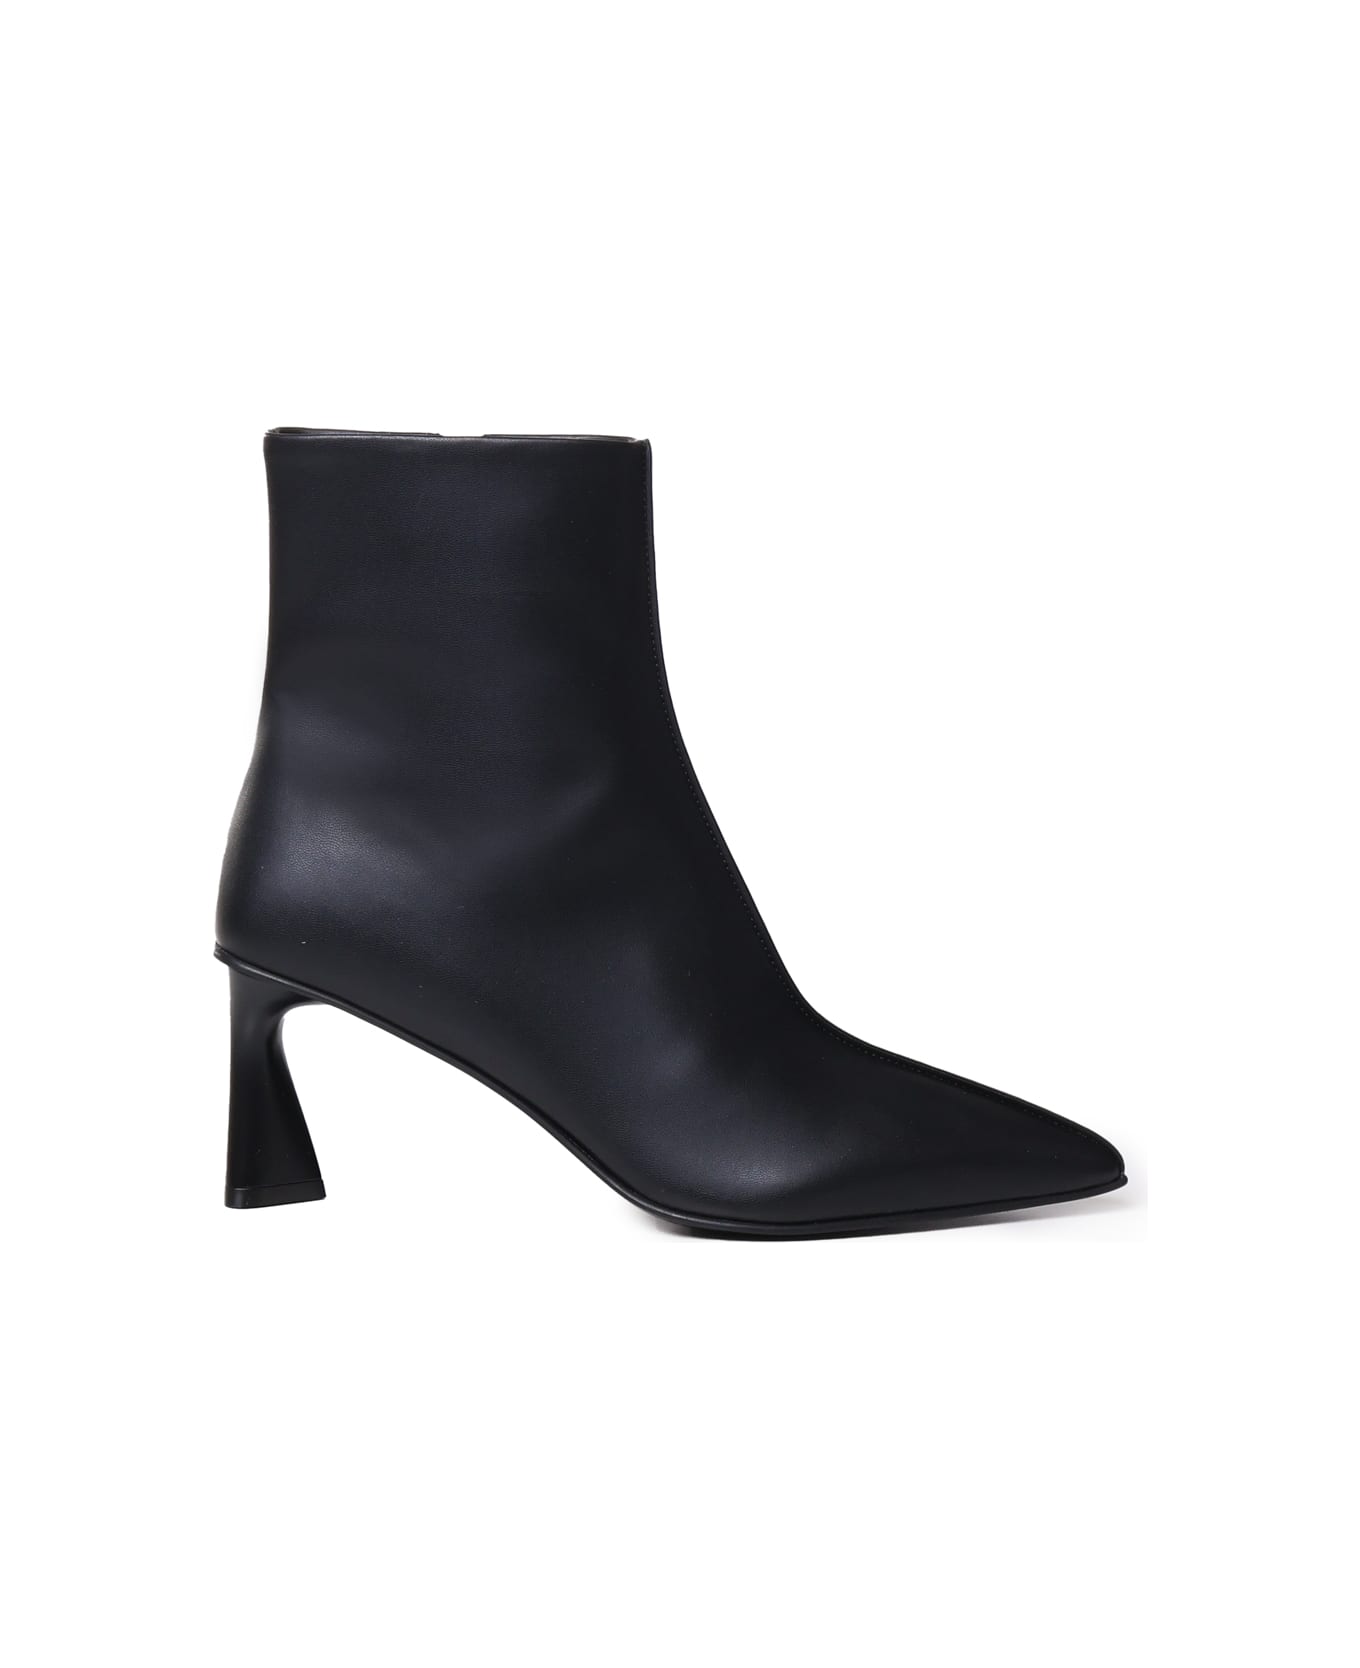 Stella McCartney Ankle Boots In Alter Mat - Black ブーツ